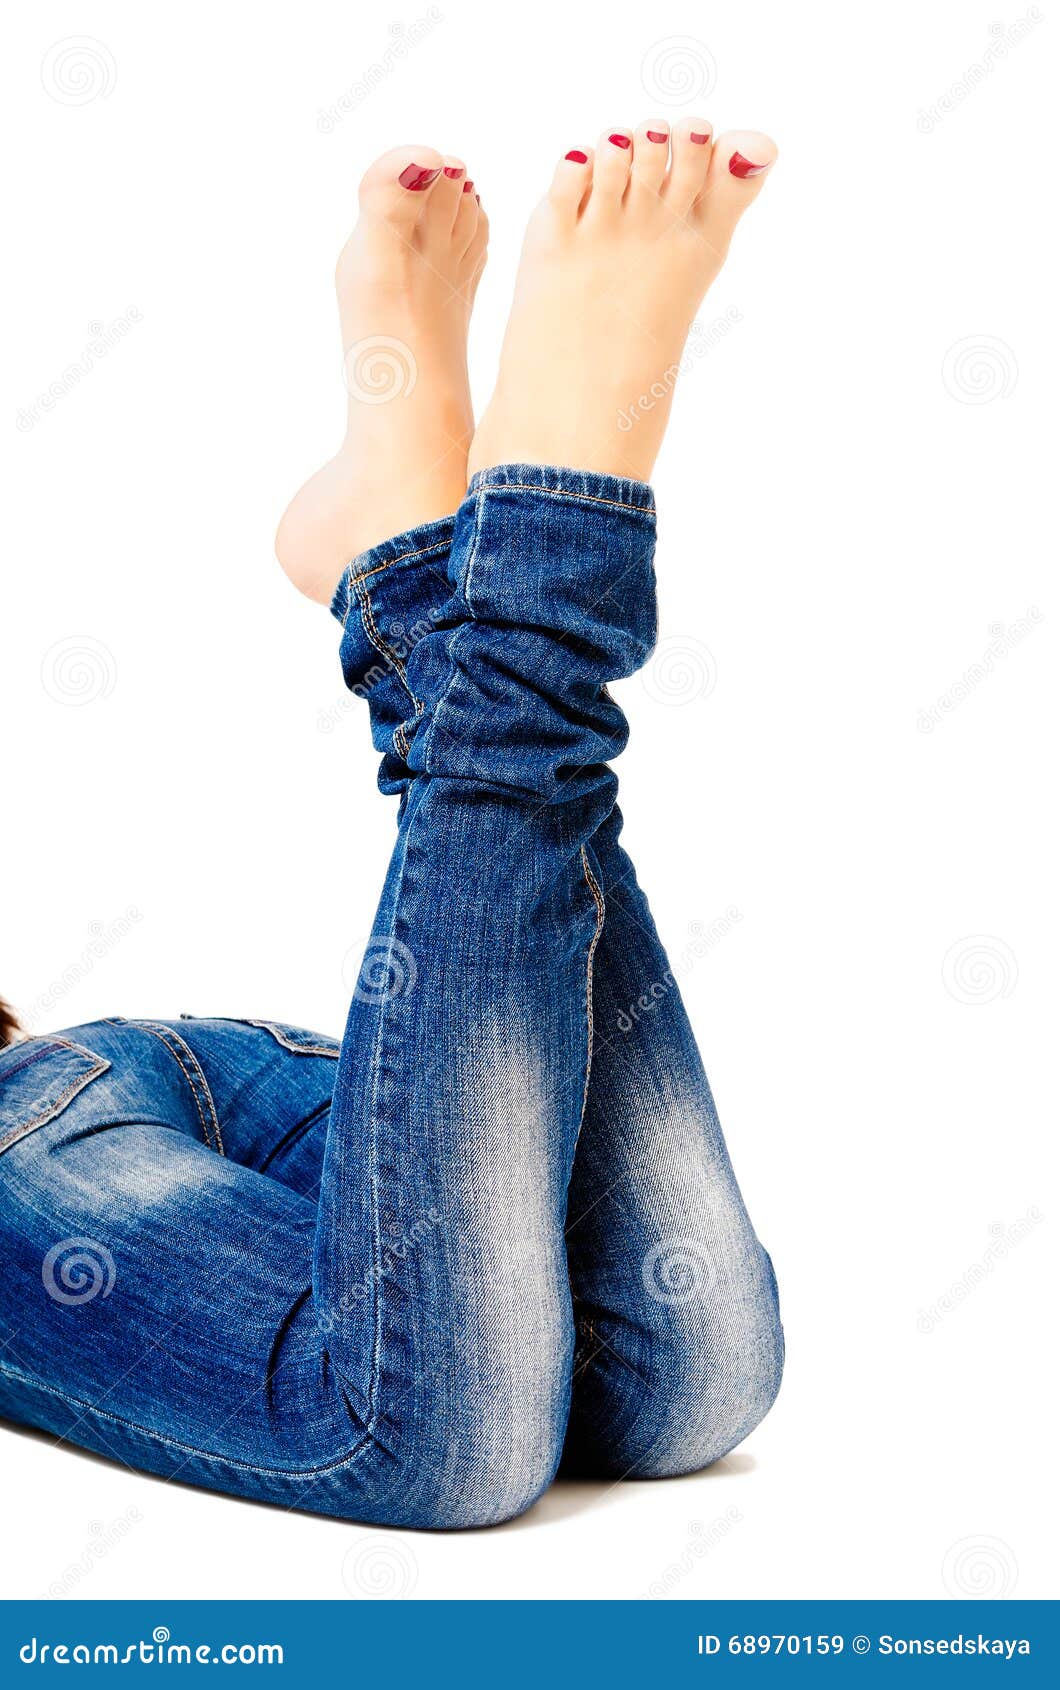 Female Groomed Legs in Jeans Stock Image - Image of closeup, barefoot ...